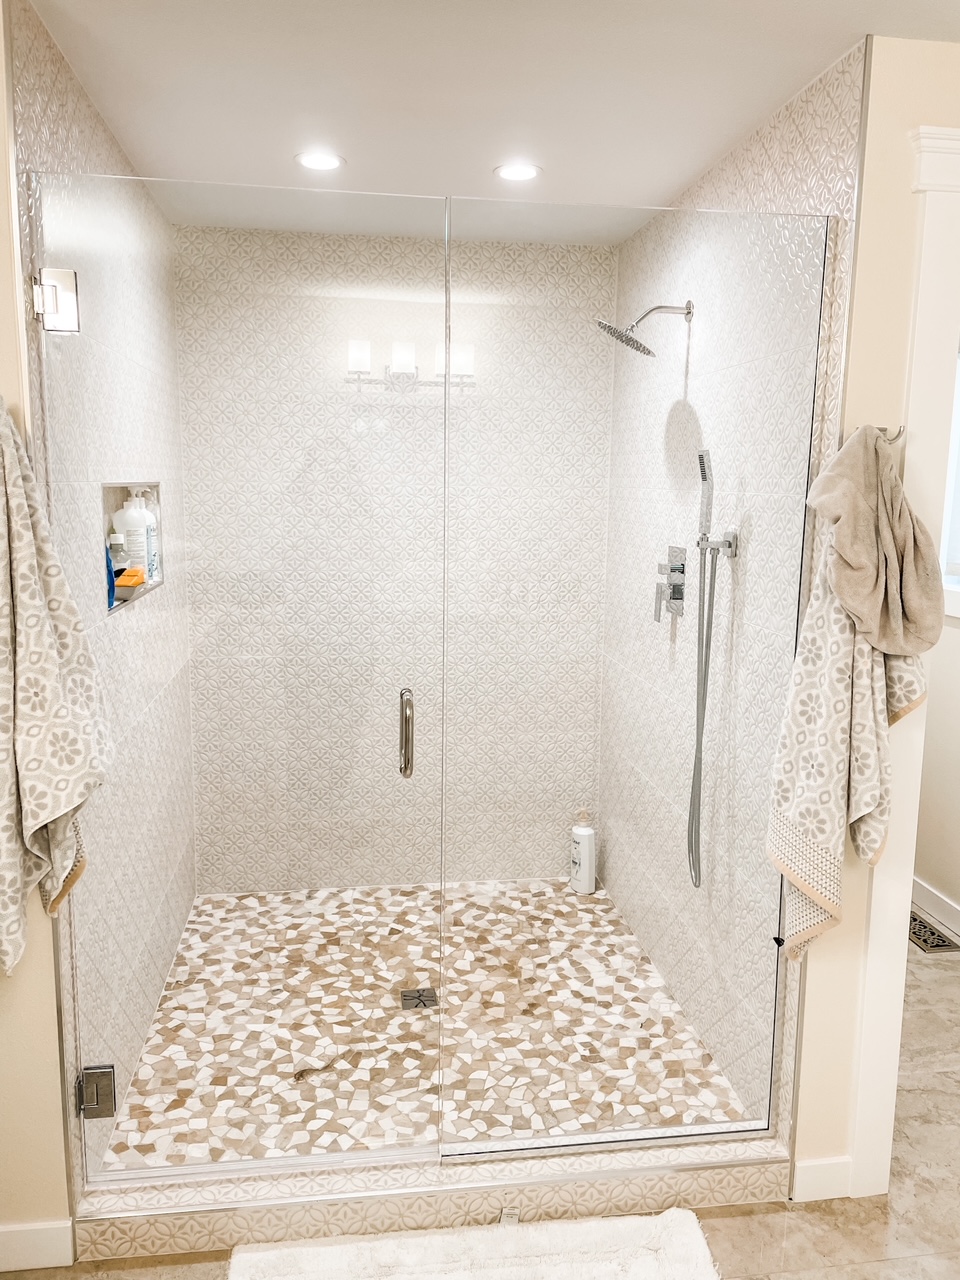 The whole view of the remodeled bathroom shower